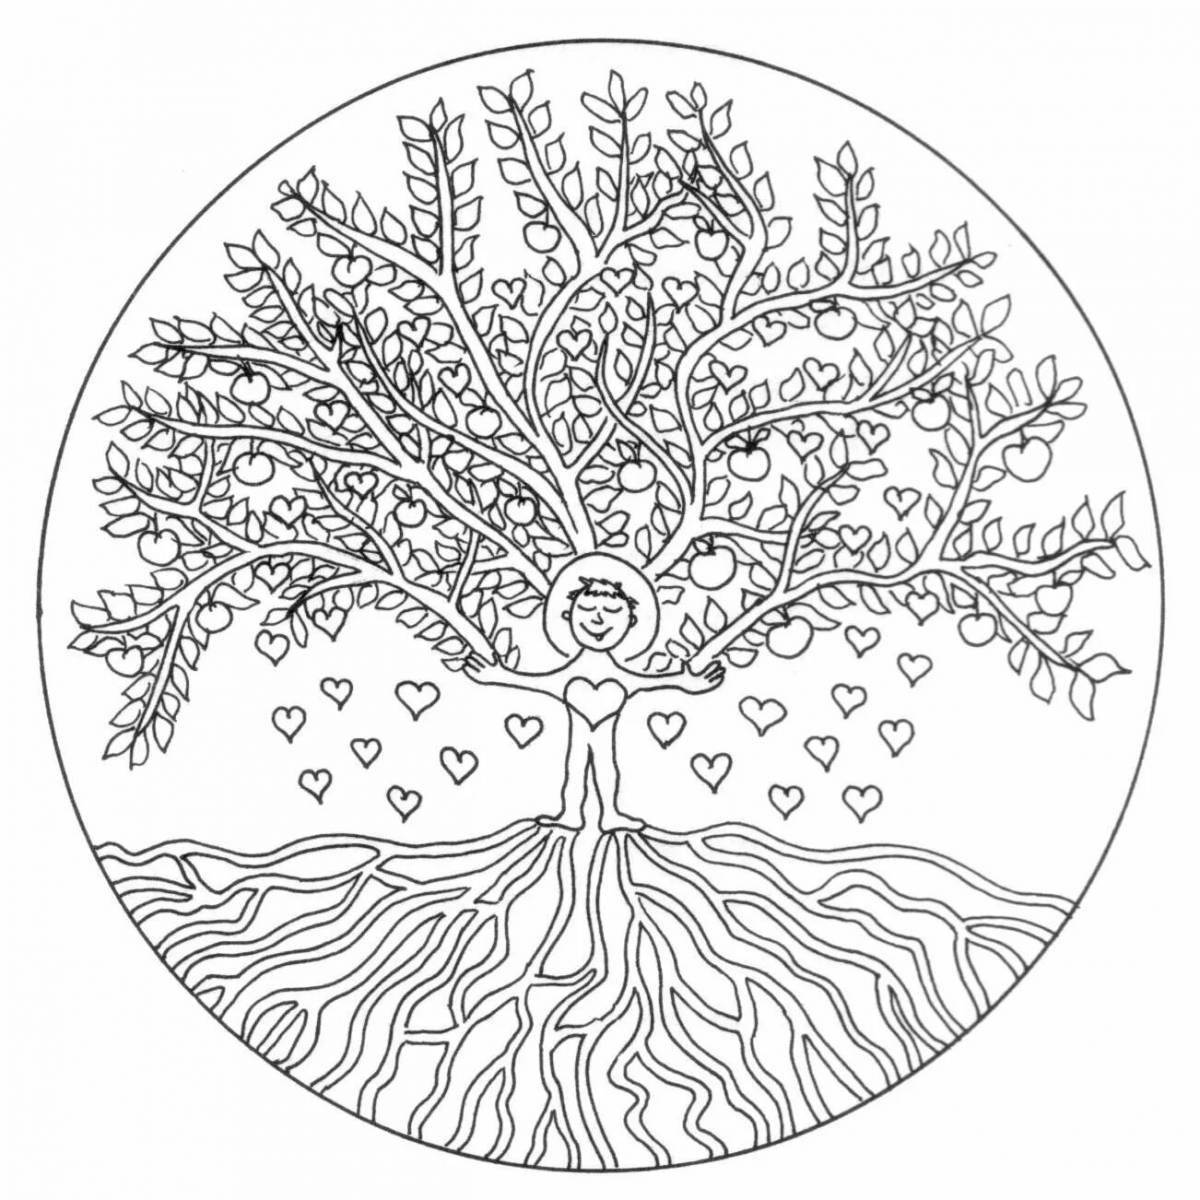 Relaxing psychological coloring book for children